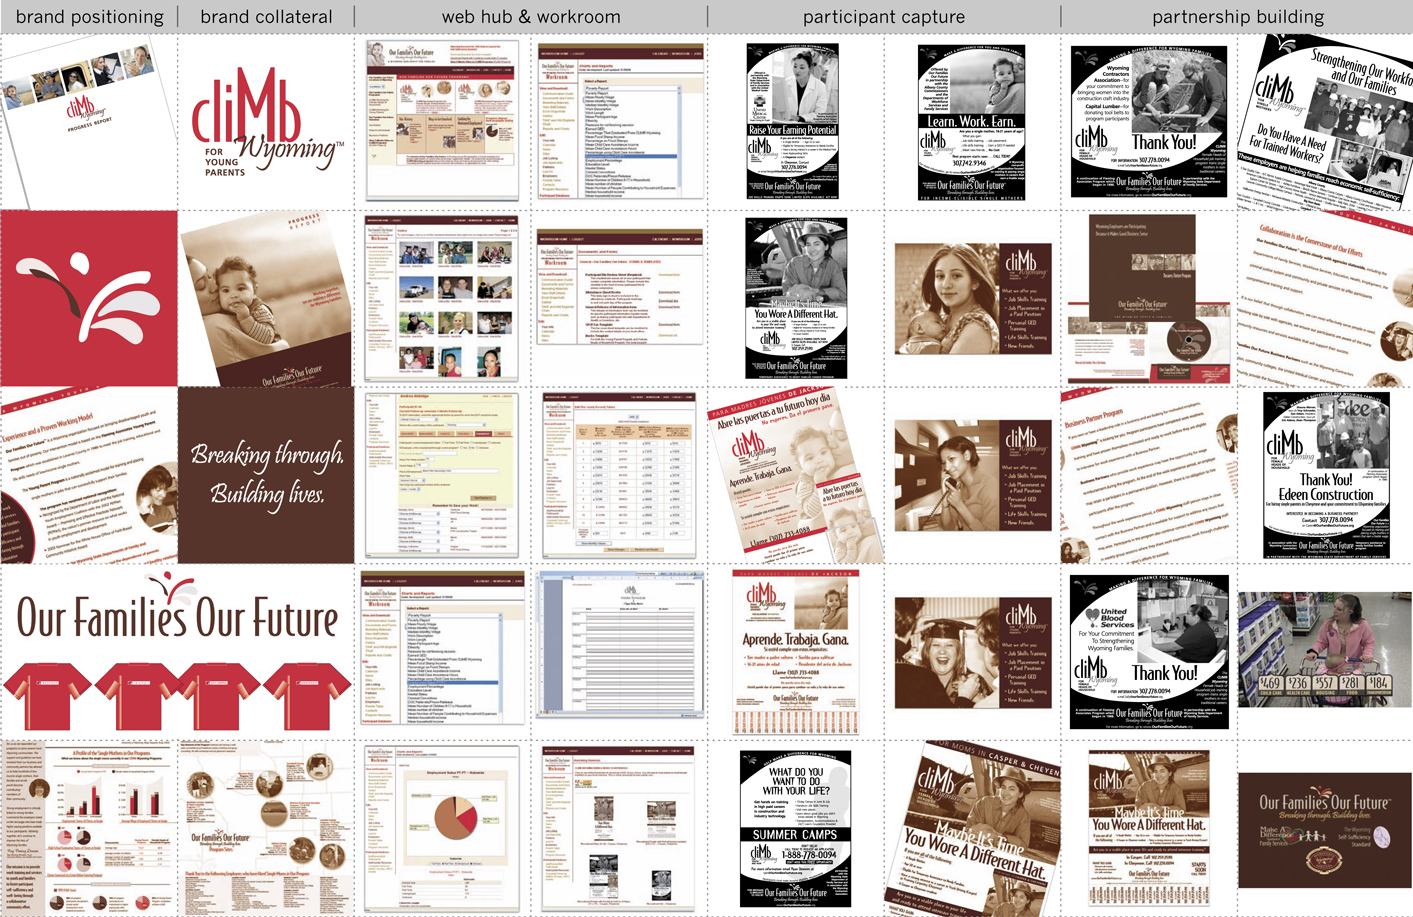 Campaign Design / Development - Our Families Our Future Wyoming